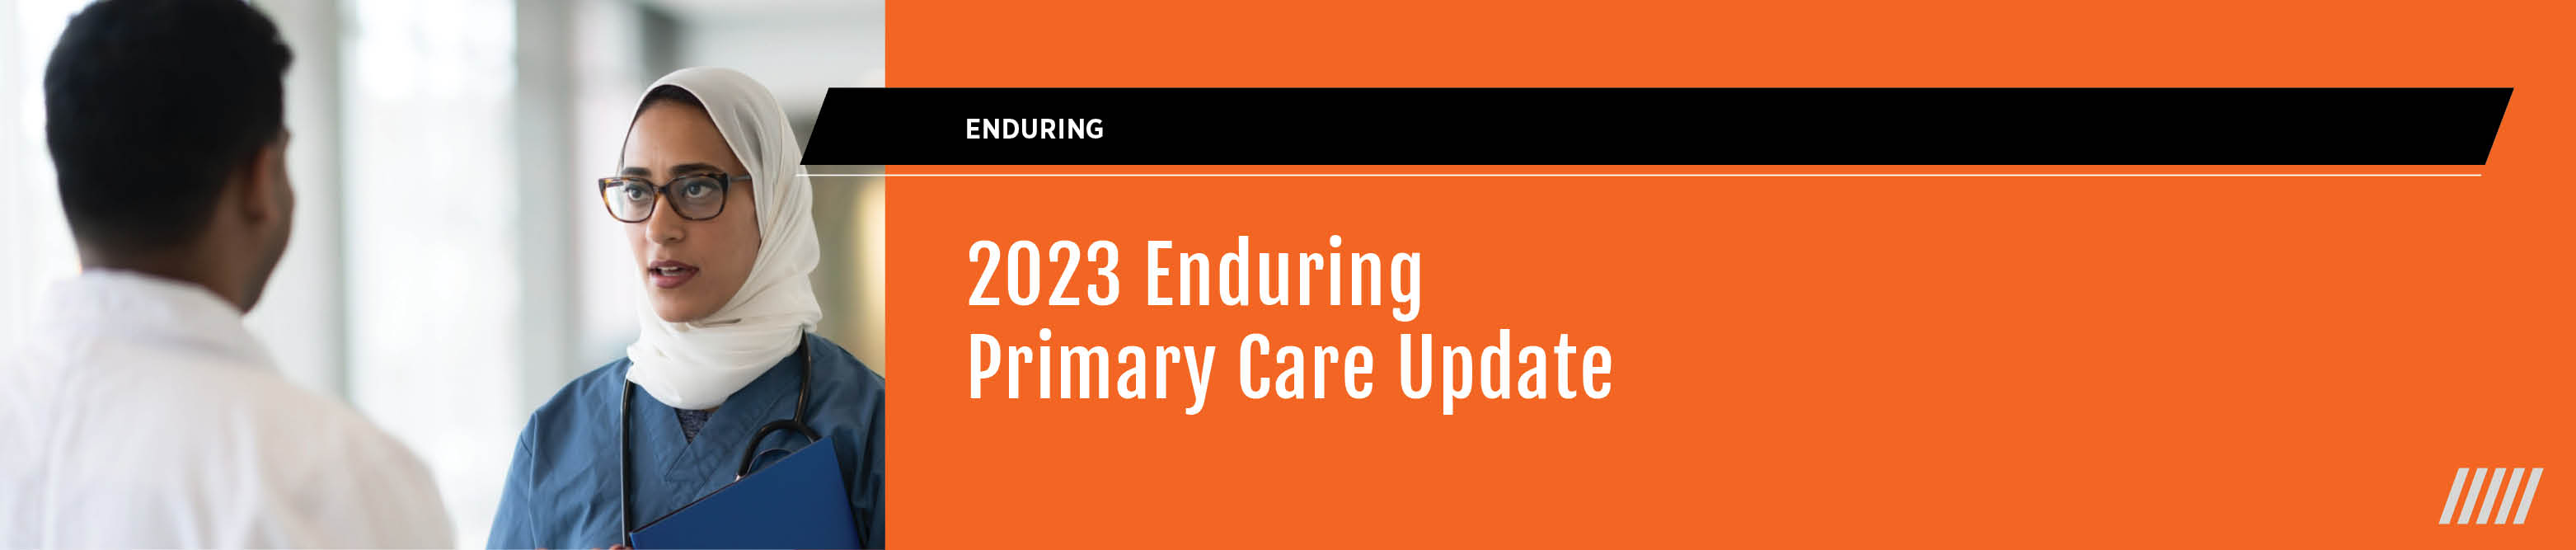 2023 Primary Care Update - Enduring Package Banner